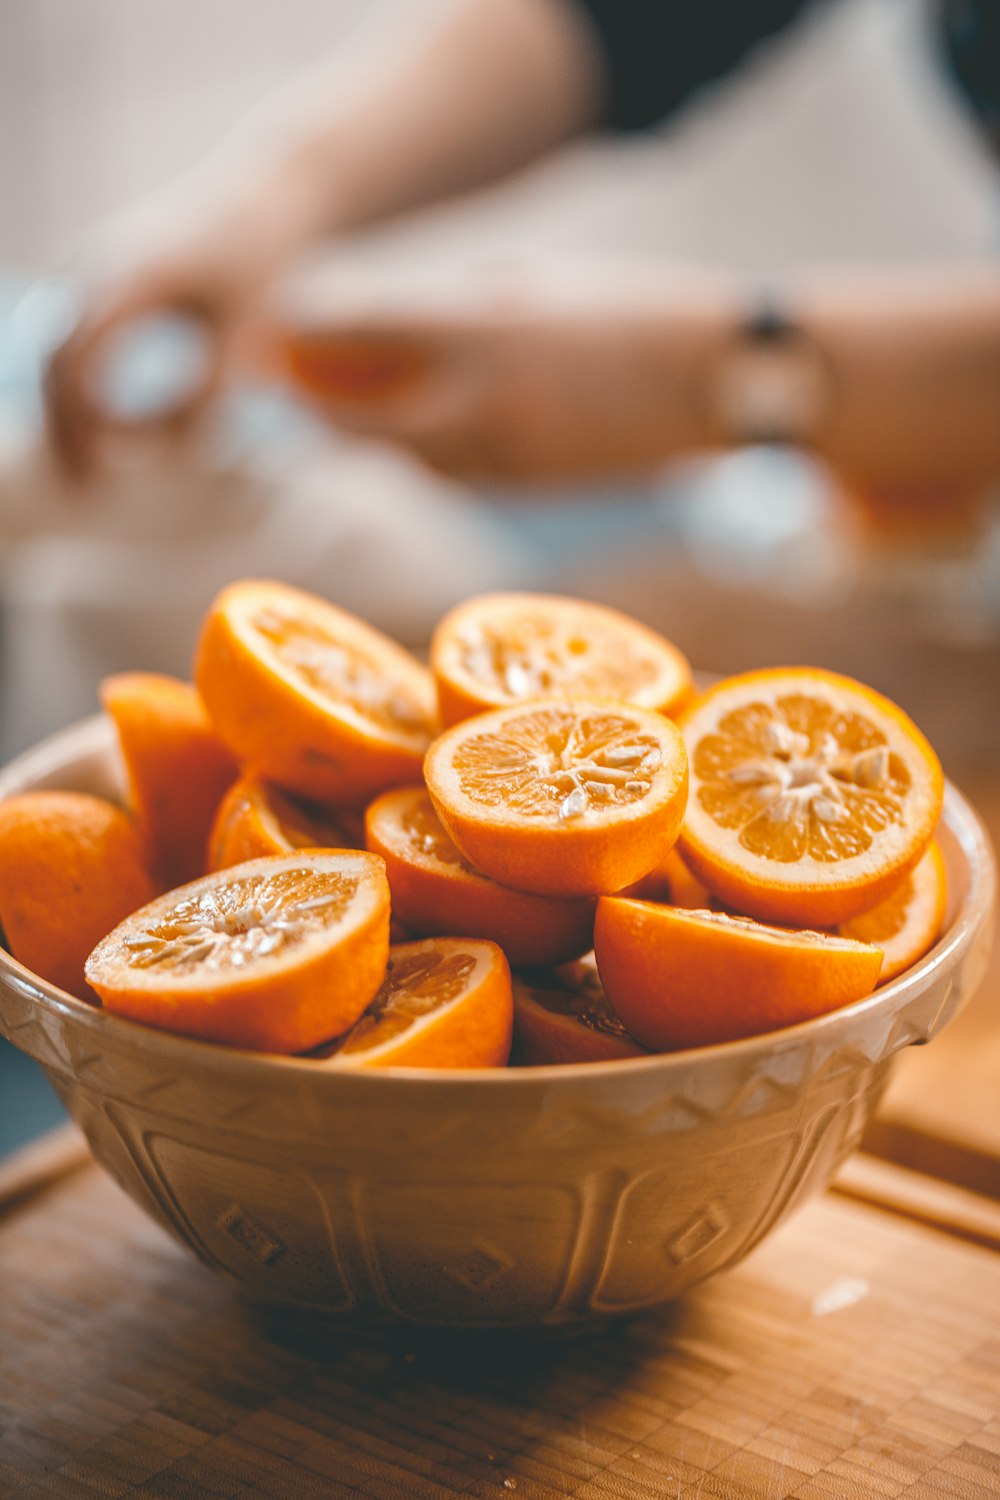 a bowl of oranges sitting on a table